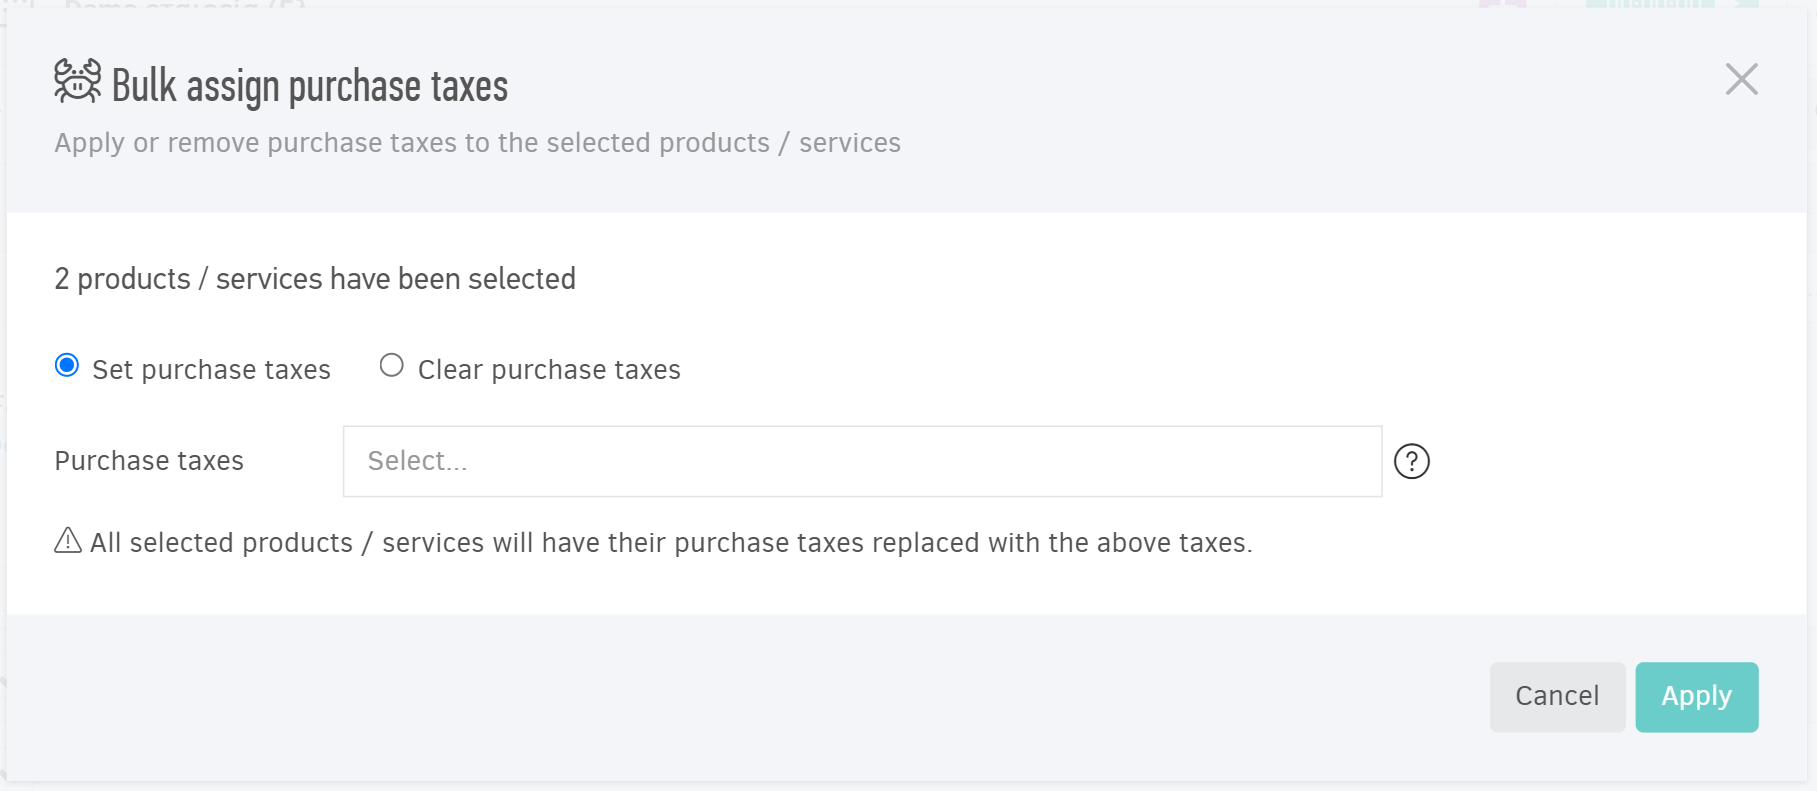 Bulk assignment of purchase taxes